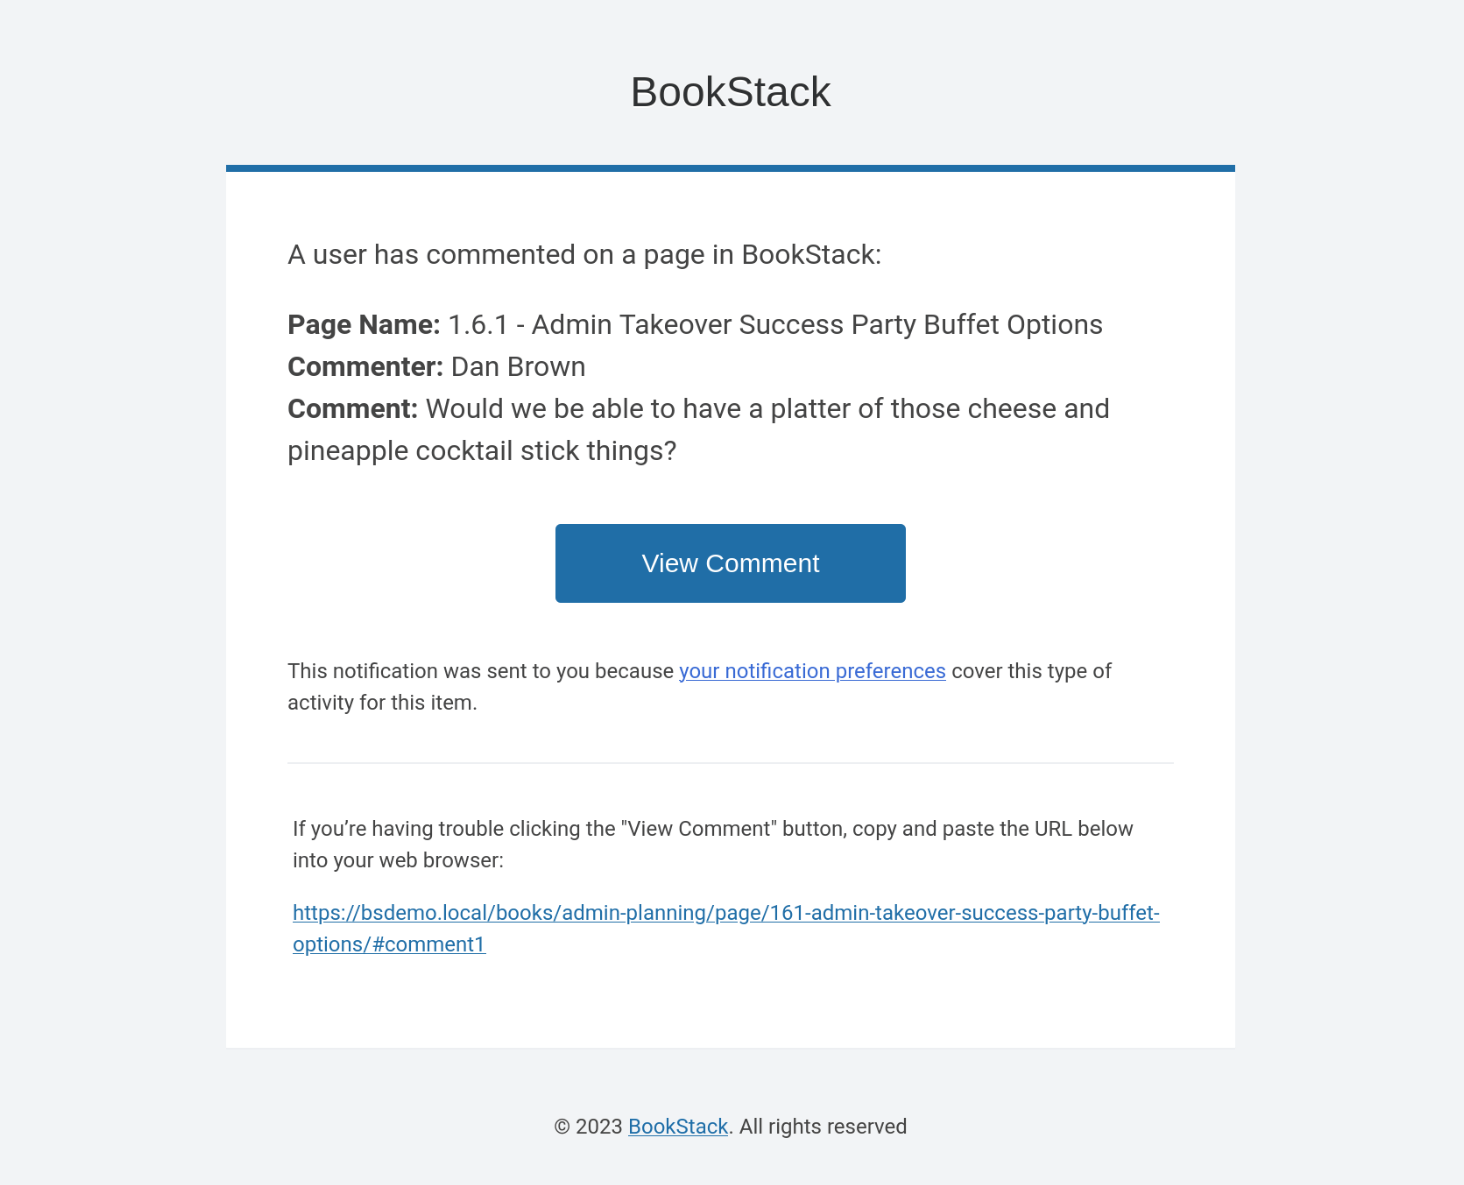 Screenshot of a notification email for a comment, including page name, commenter name and comment text, along with a linked CTA button to view the comment